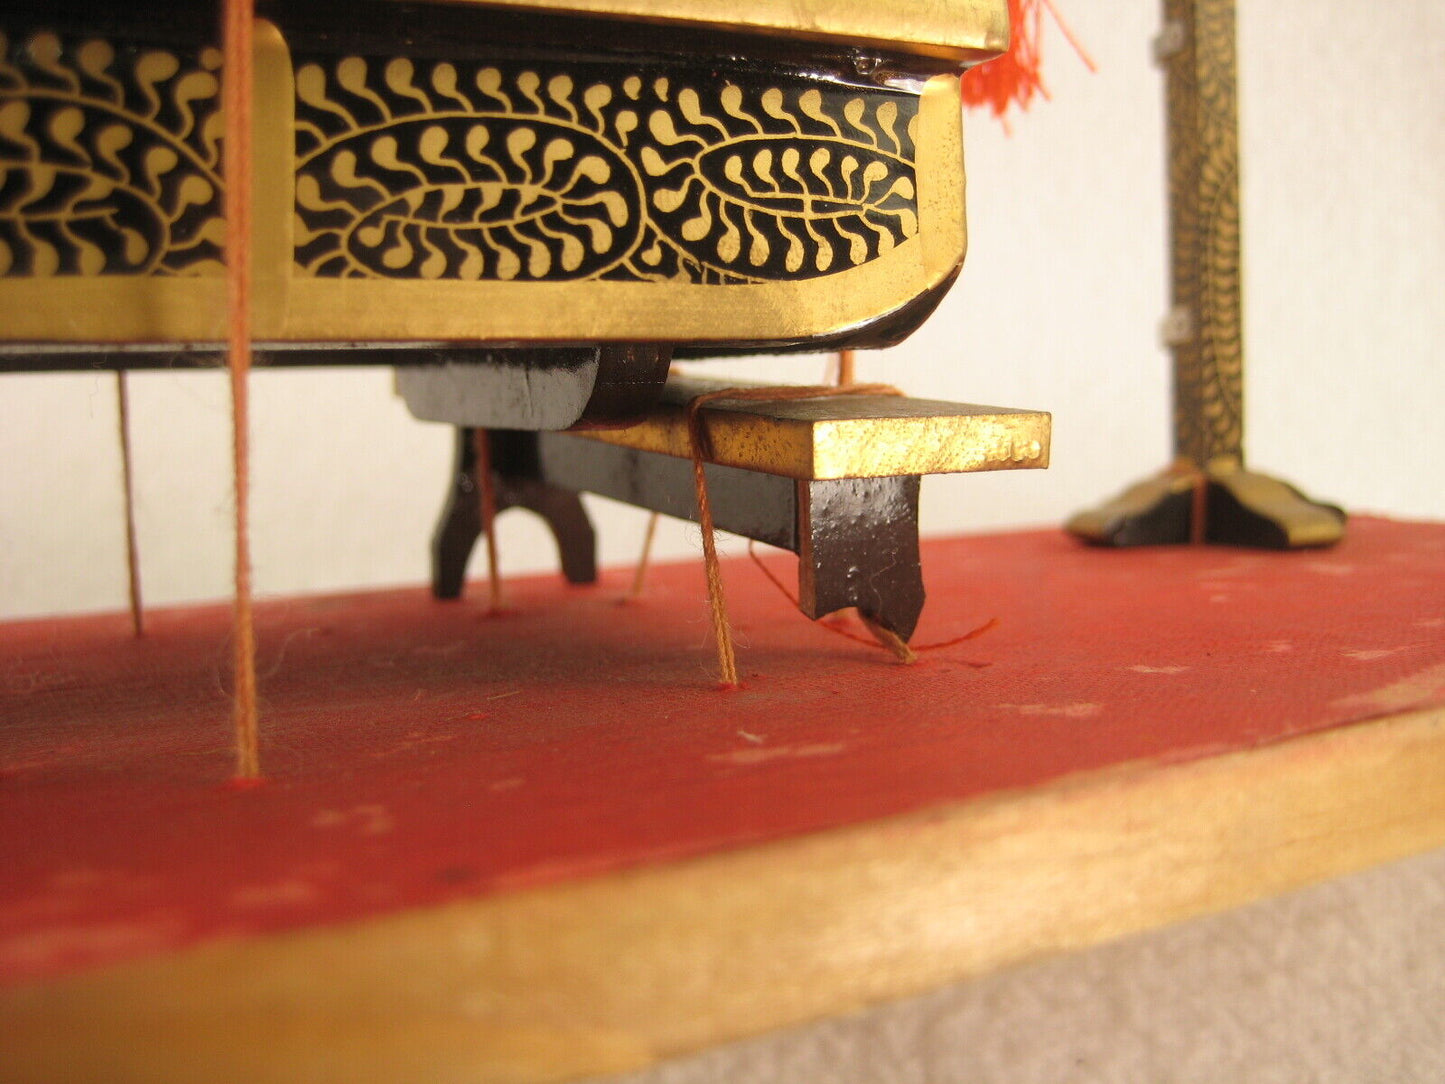 Antique Japanese Hinanigyo Girls Day Black And Gold Lacquered Palanquin